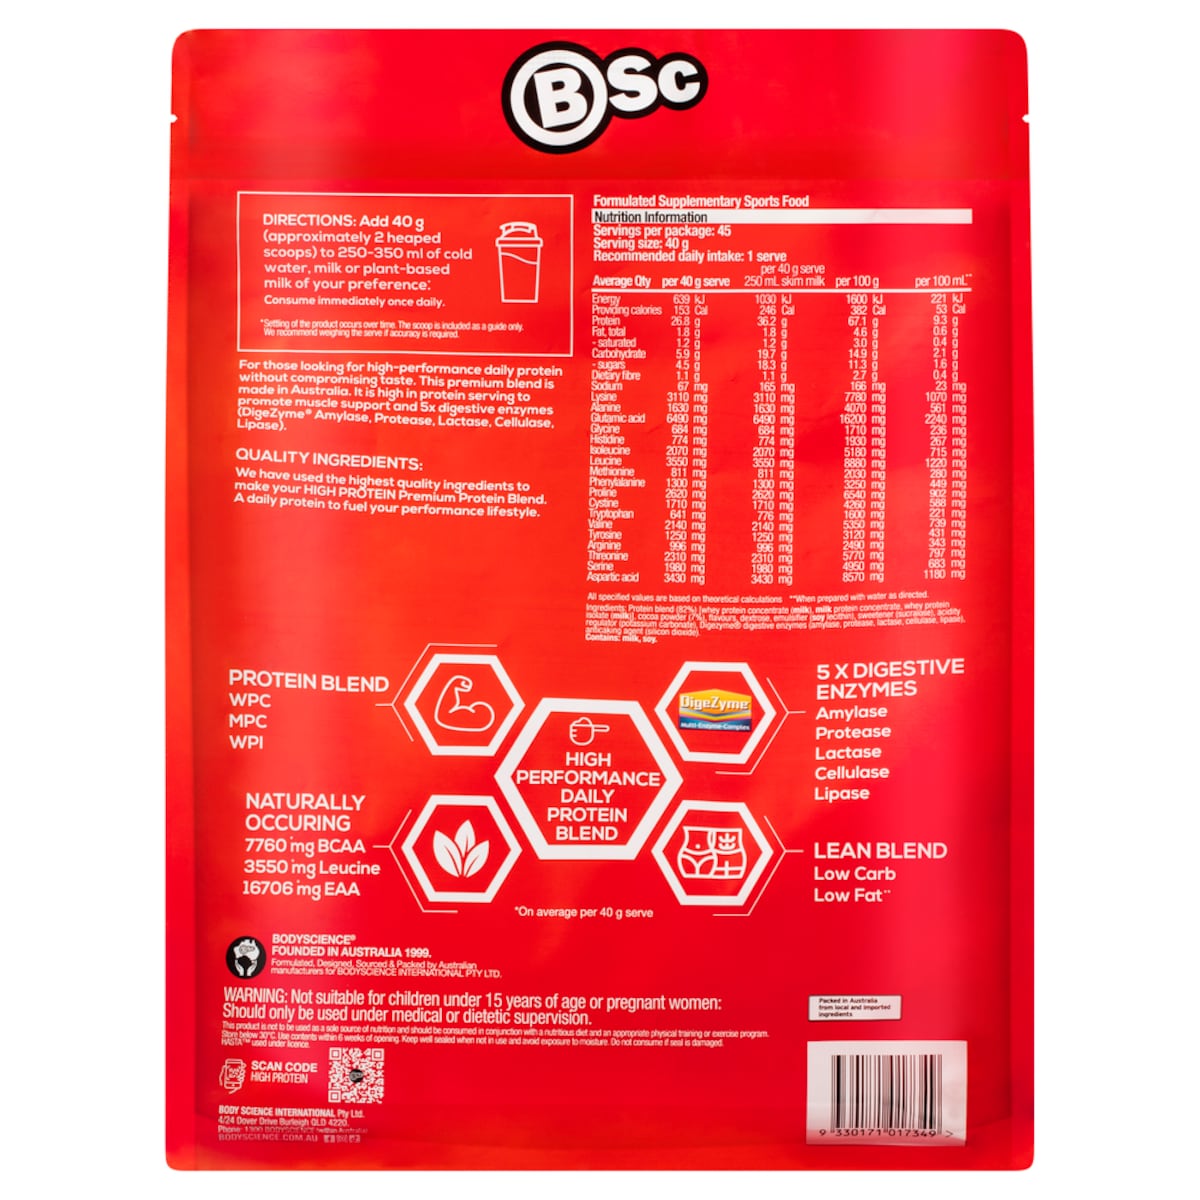 BSc Body Science High Protein Powder Chocolate - 1.8kg